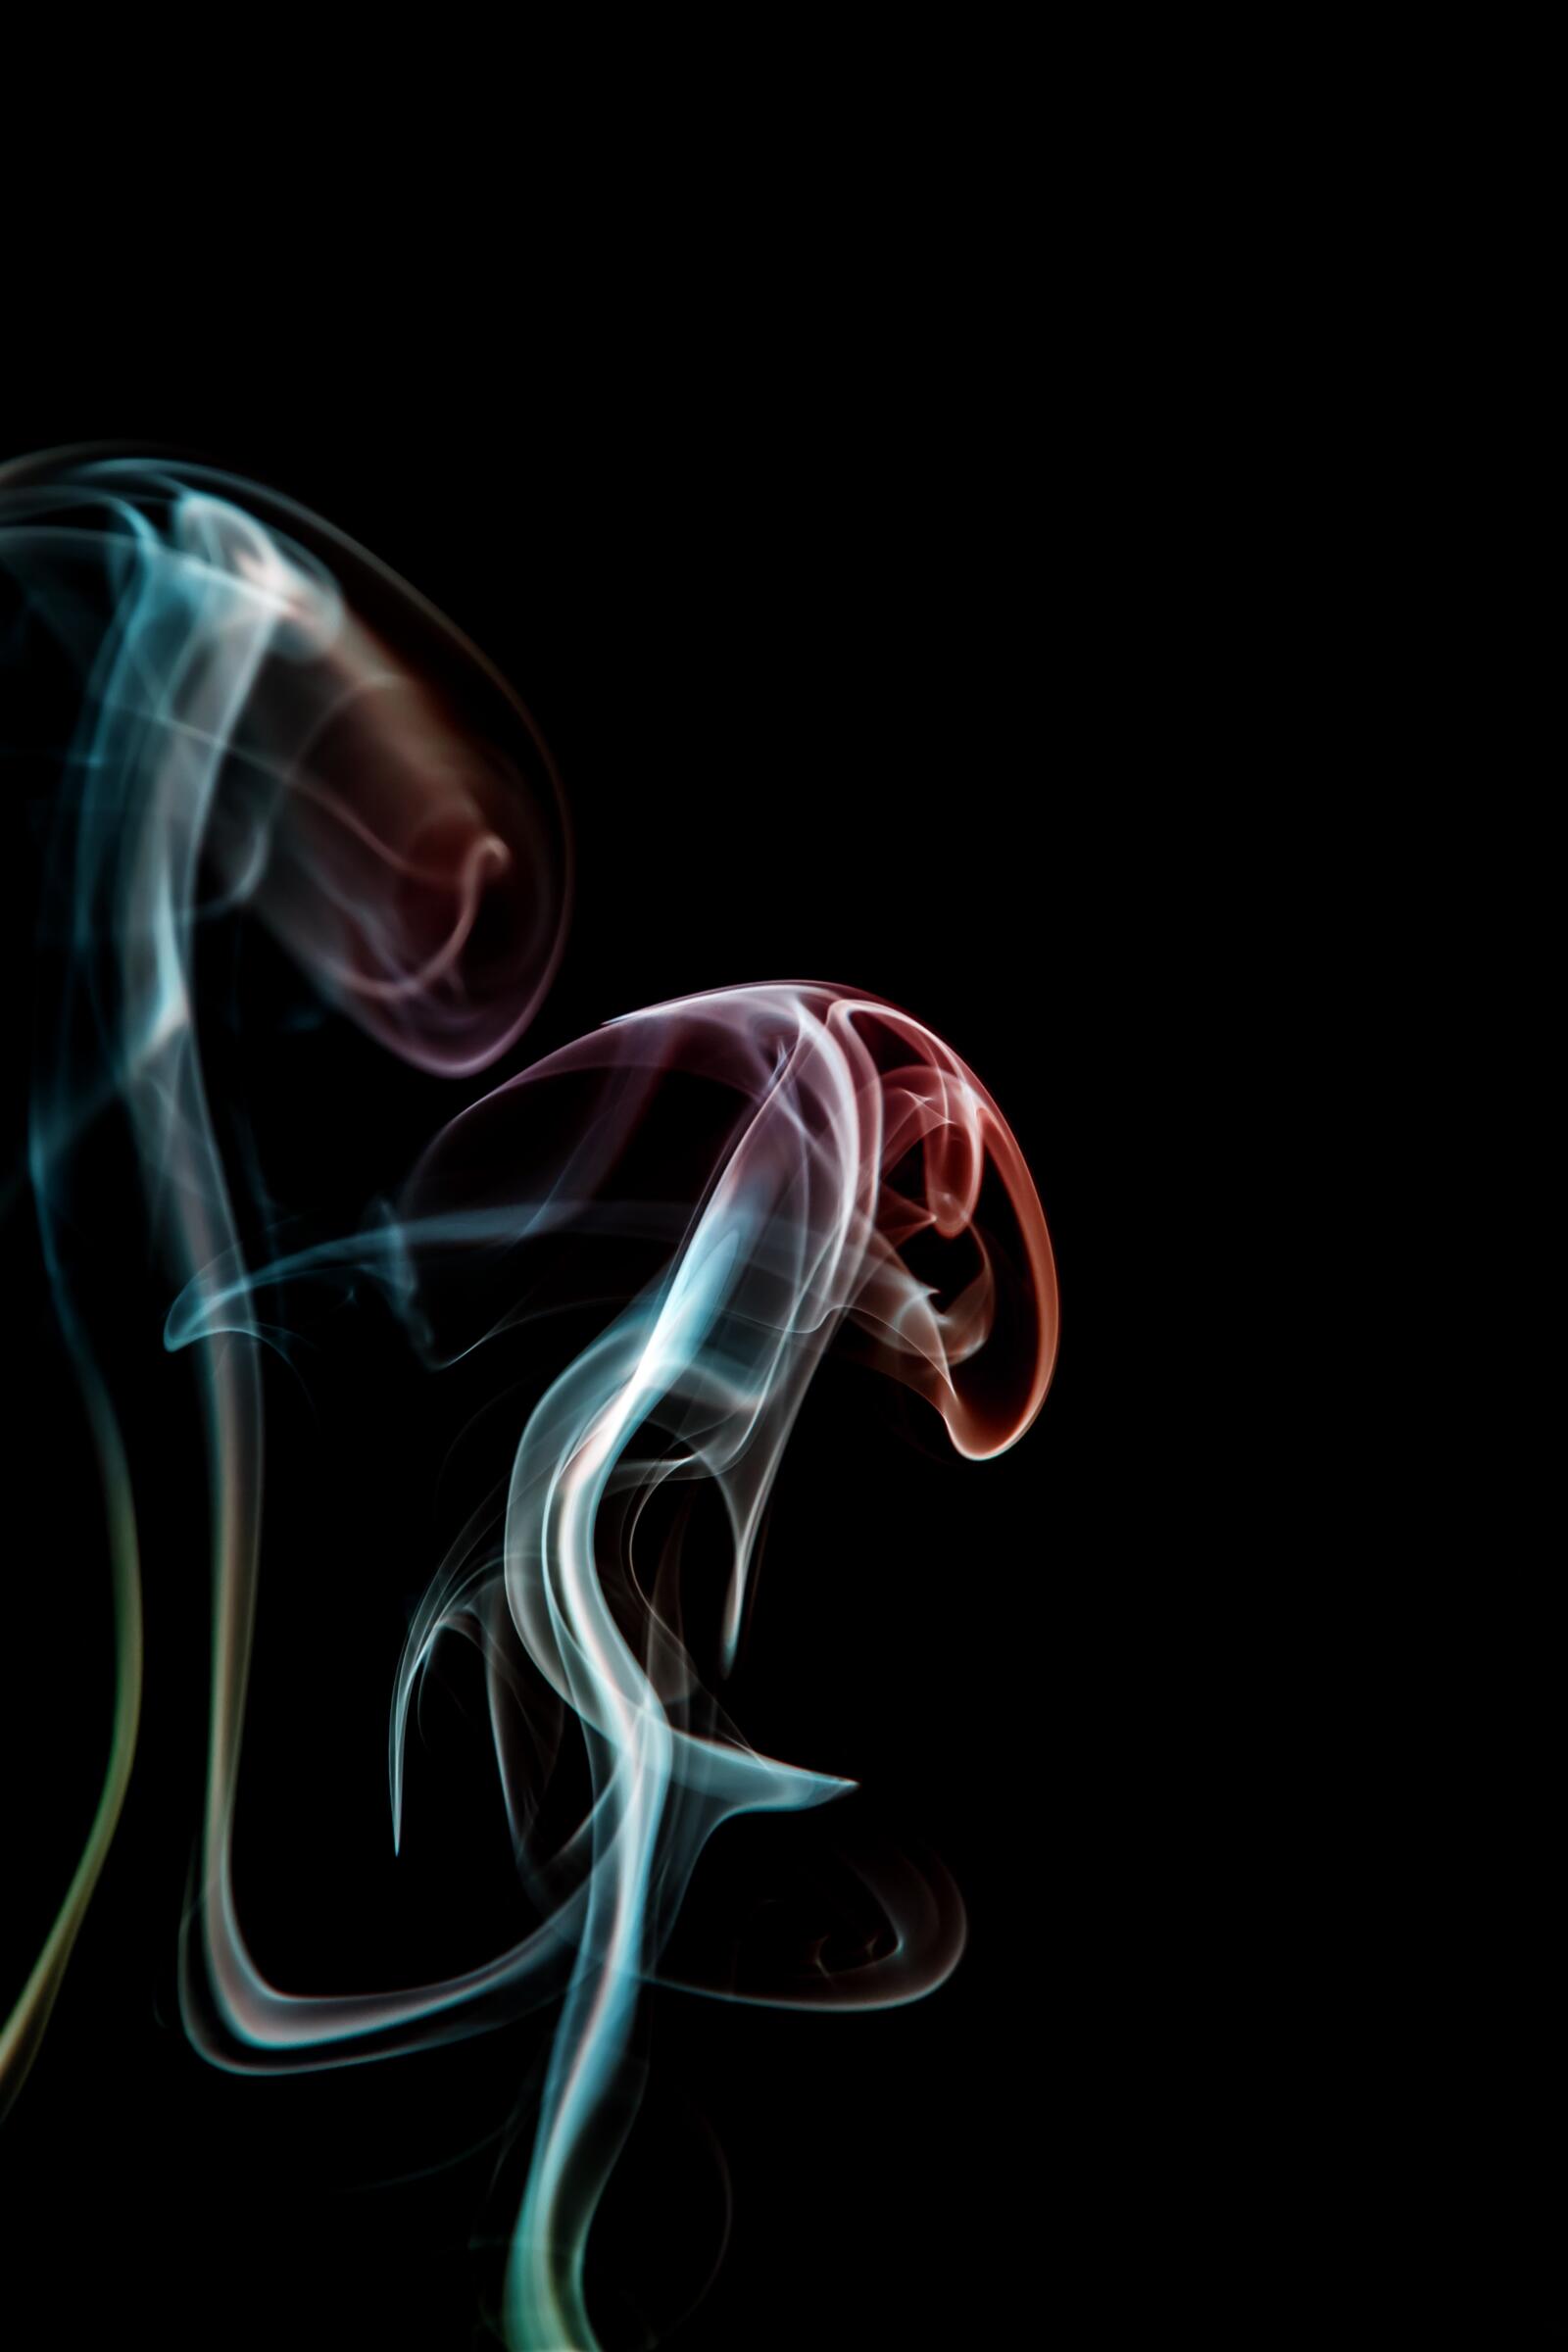 Wallpapers smoke colorful black background on the desktop